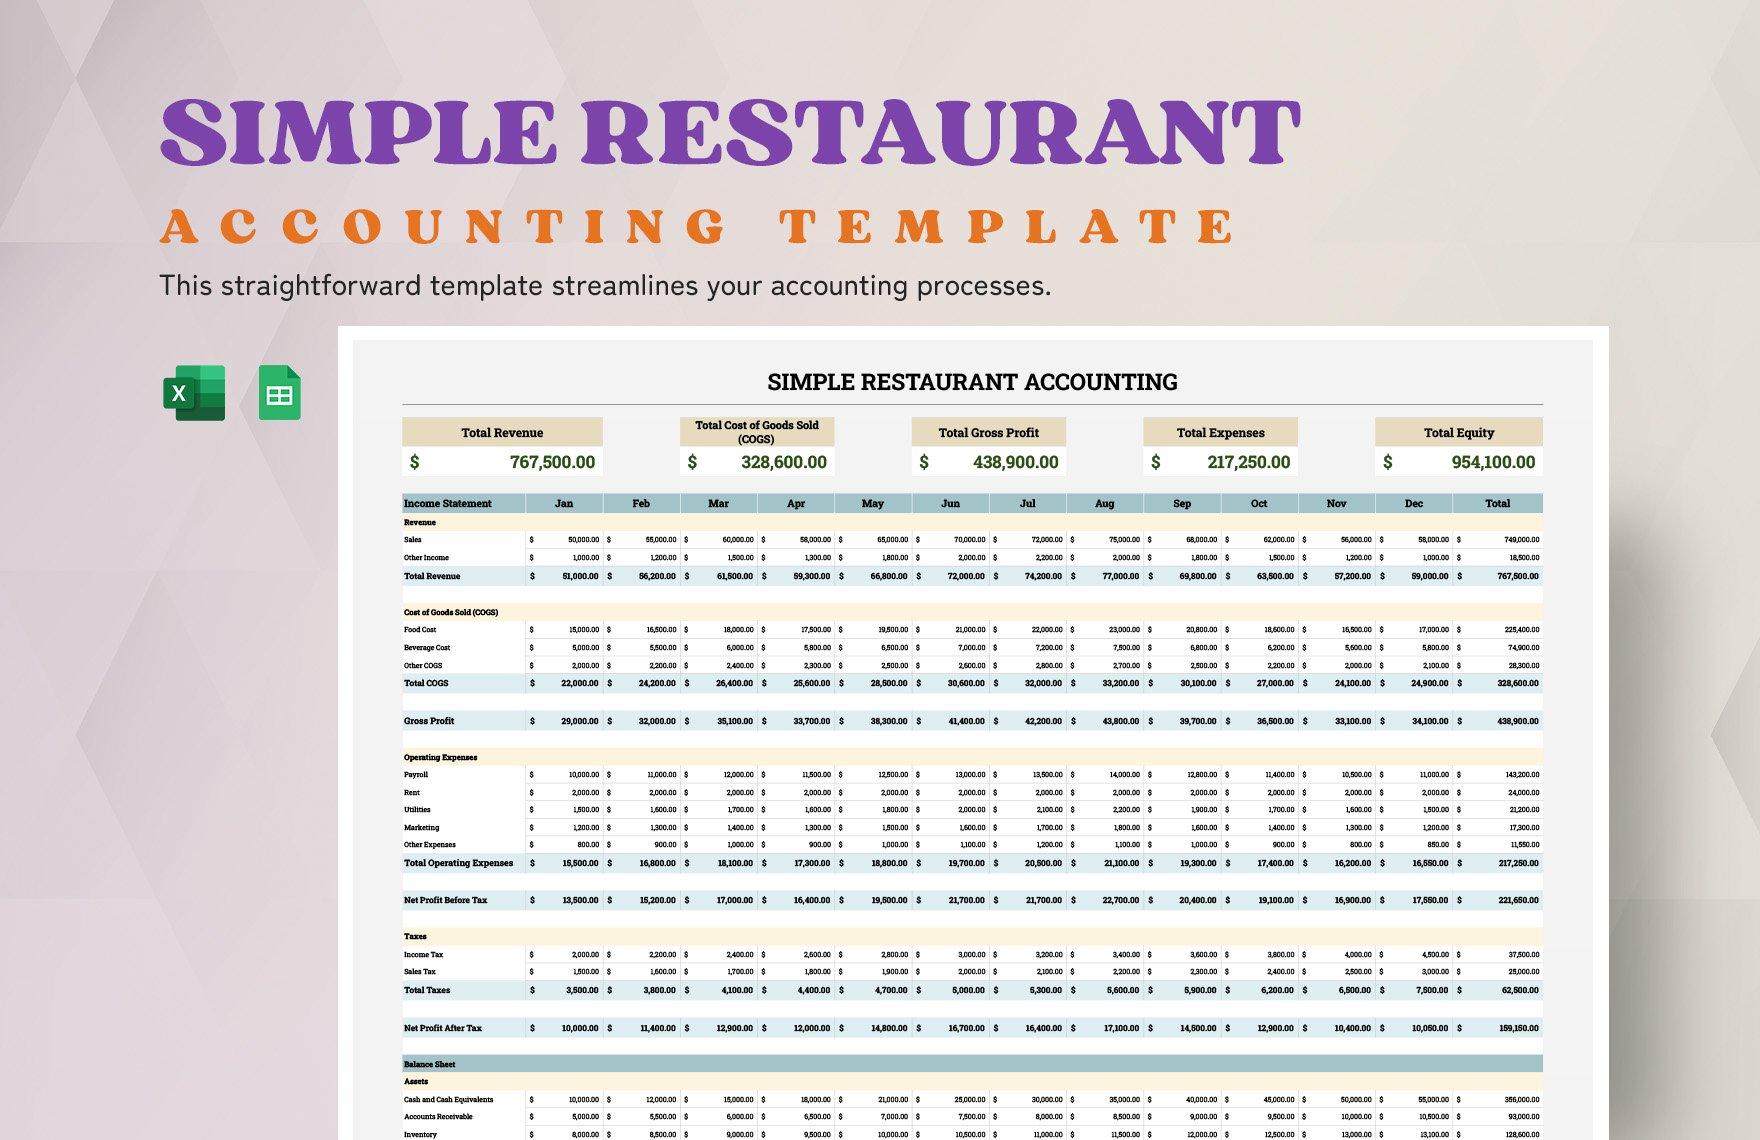 Simple Restaurant Accounting Template